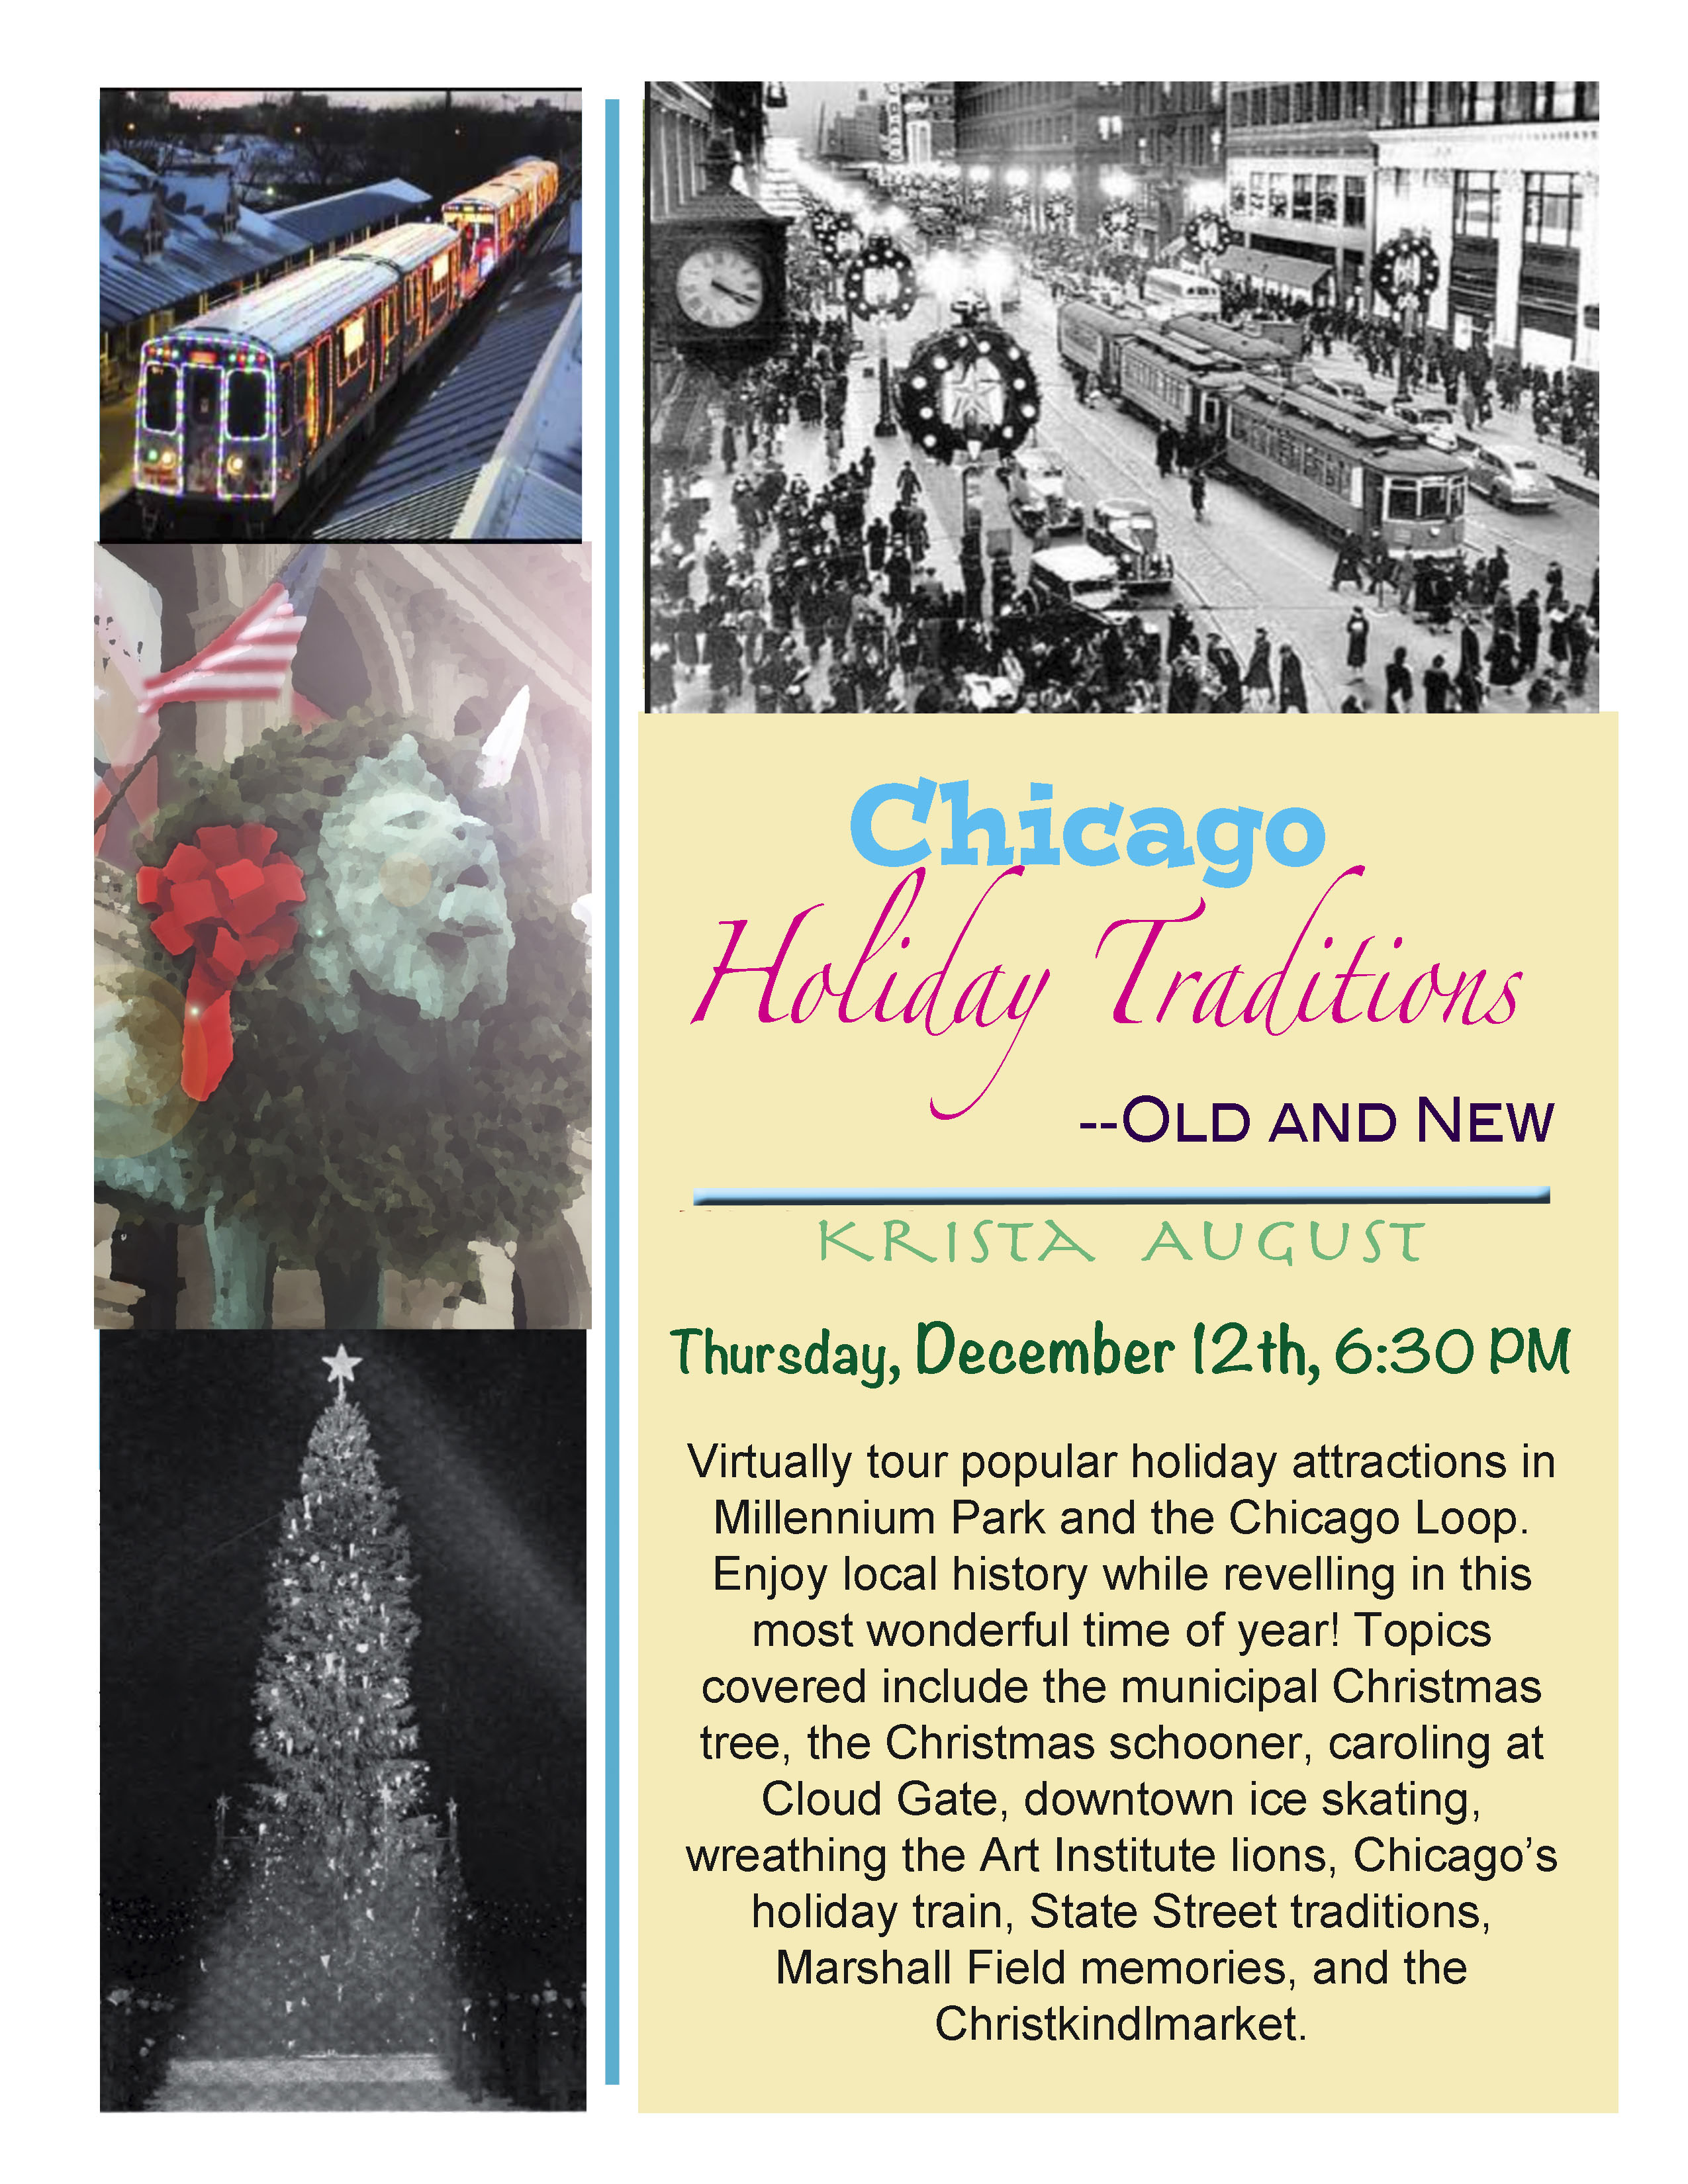 Chicago Holiday Traditions: Old and New